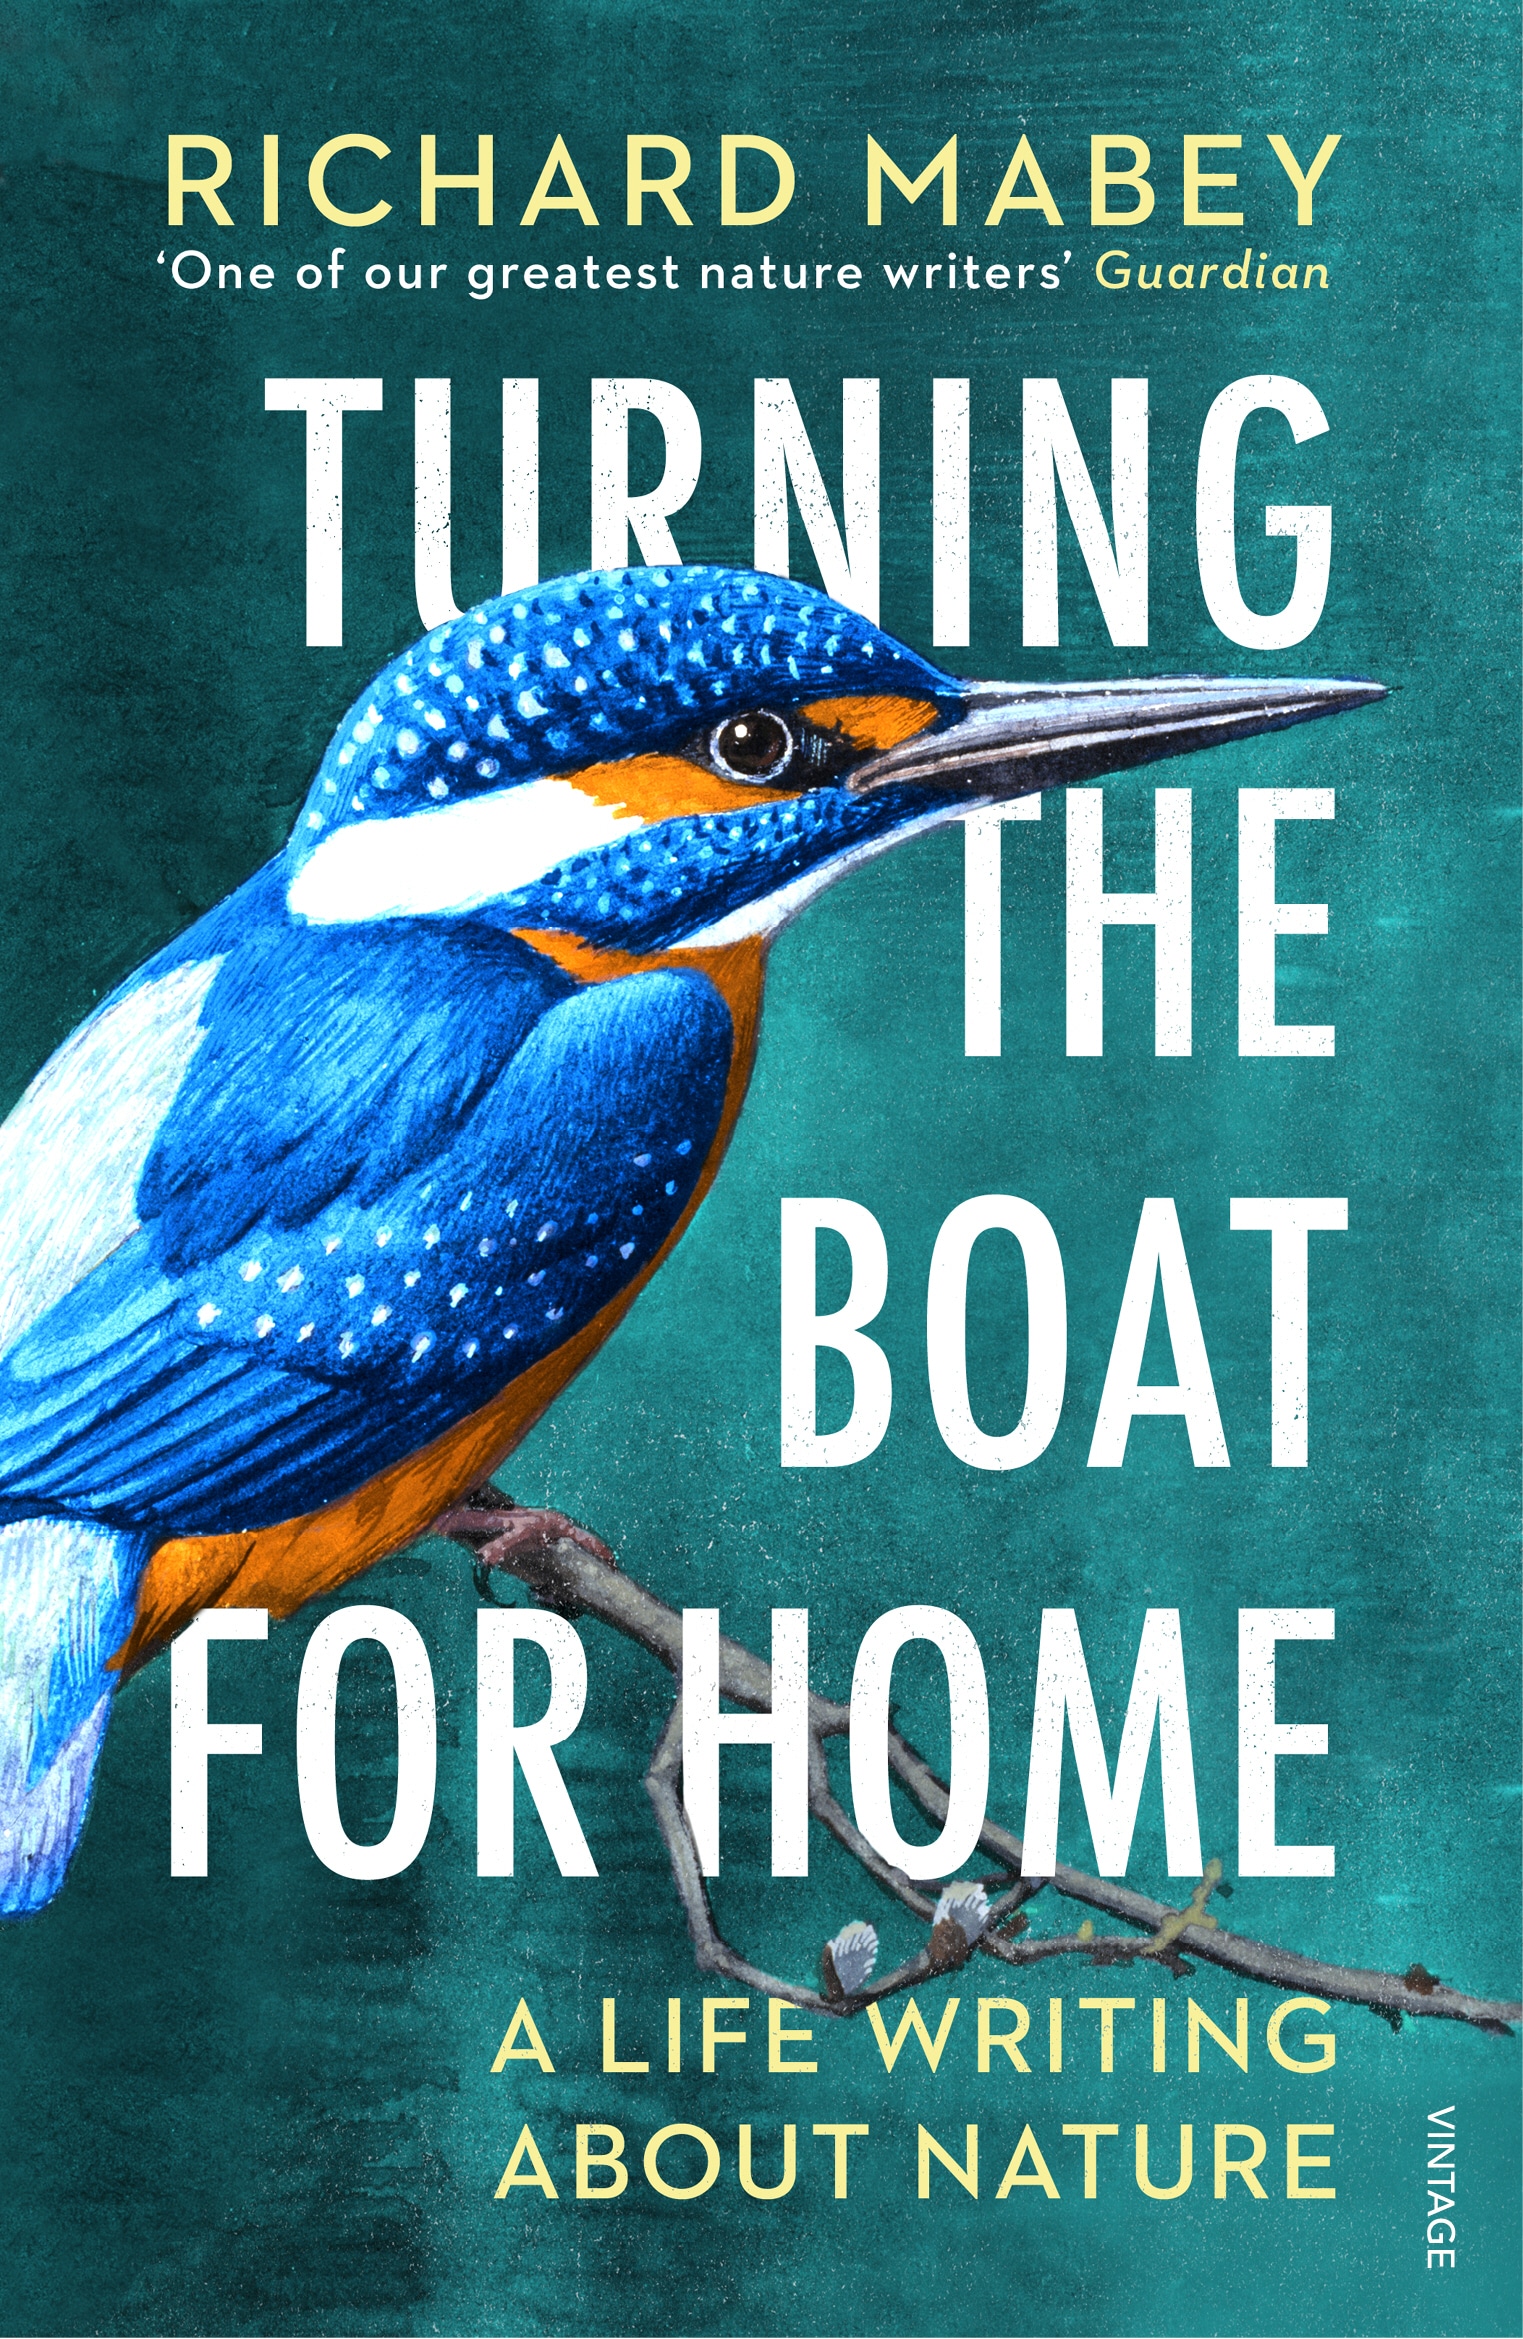 Book “Turning the Boat for Home” by Richard Mabey — March 4, 2021